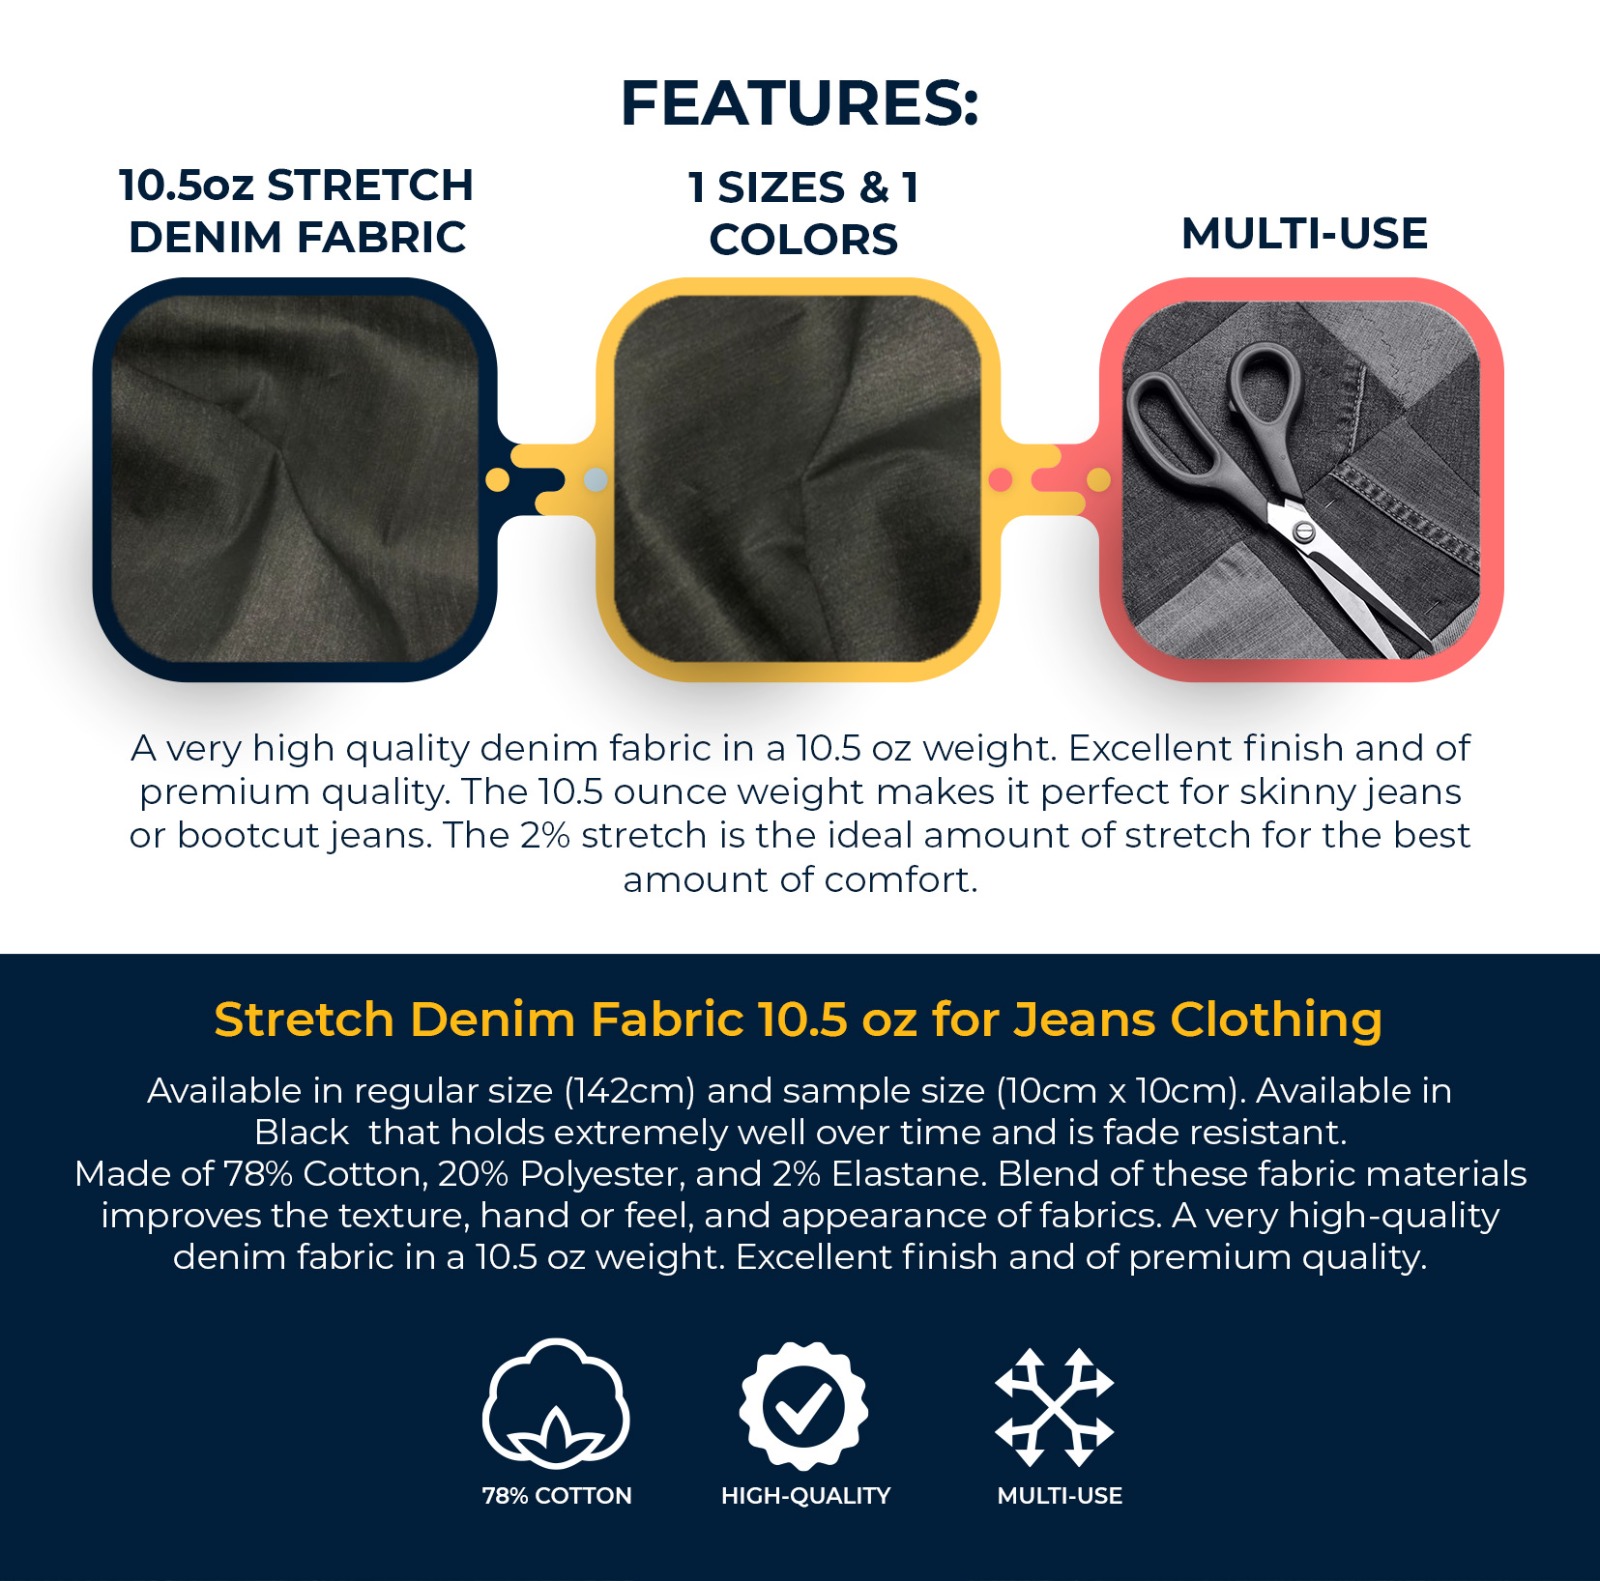 Stretch Denim Fabric 10.5 oz for Jeans Clothing Features